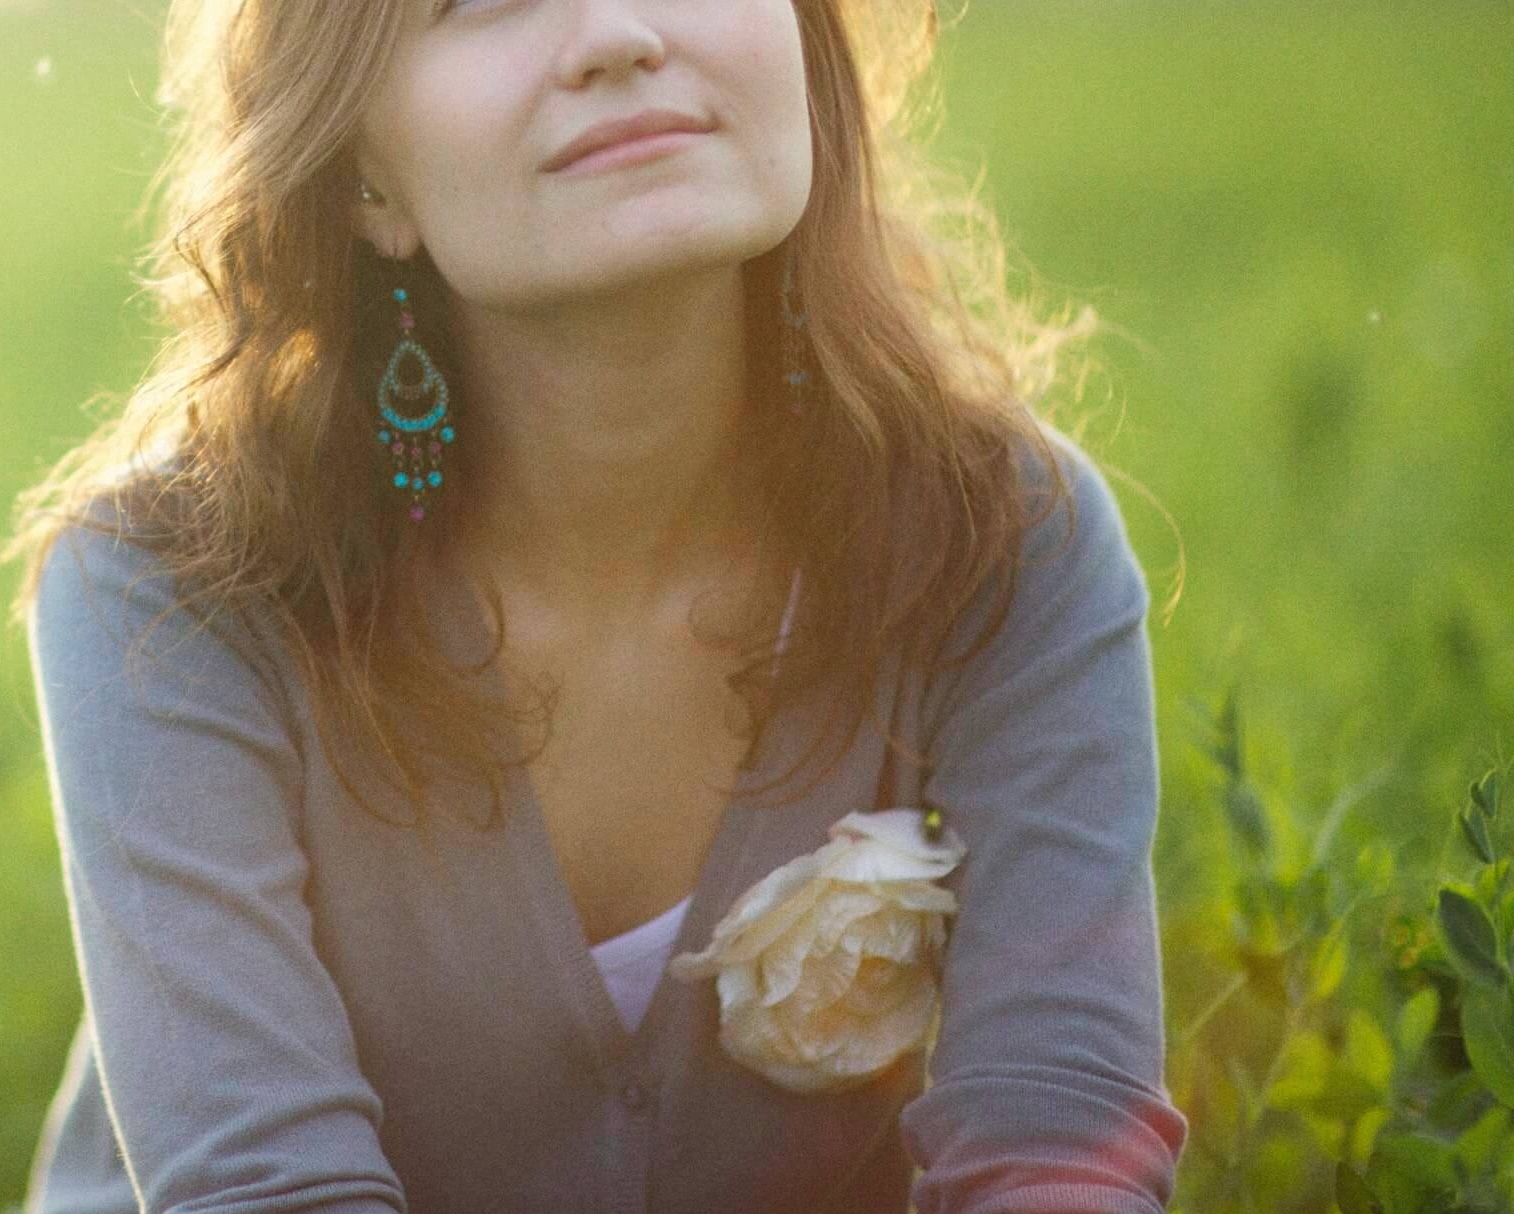 Image of a woman sitting in a field of tall grass smiling. Discover your unique personality traits with highly sensitive person therapy in Austin, TX.